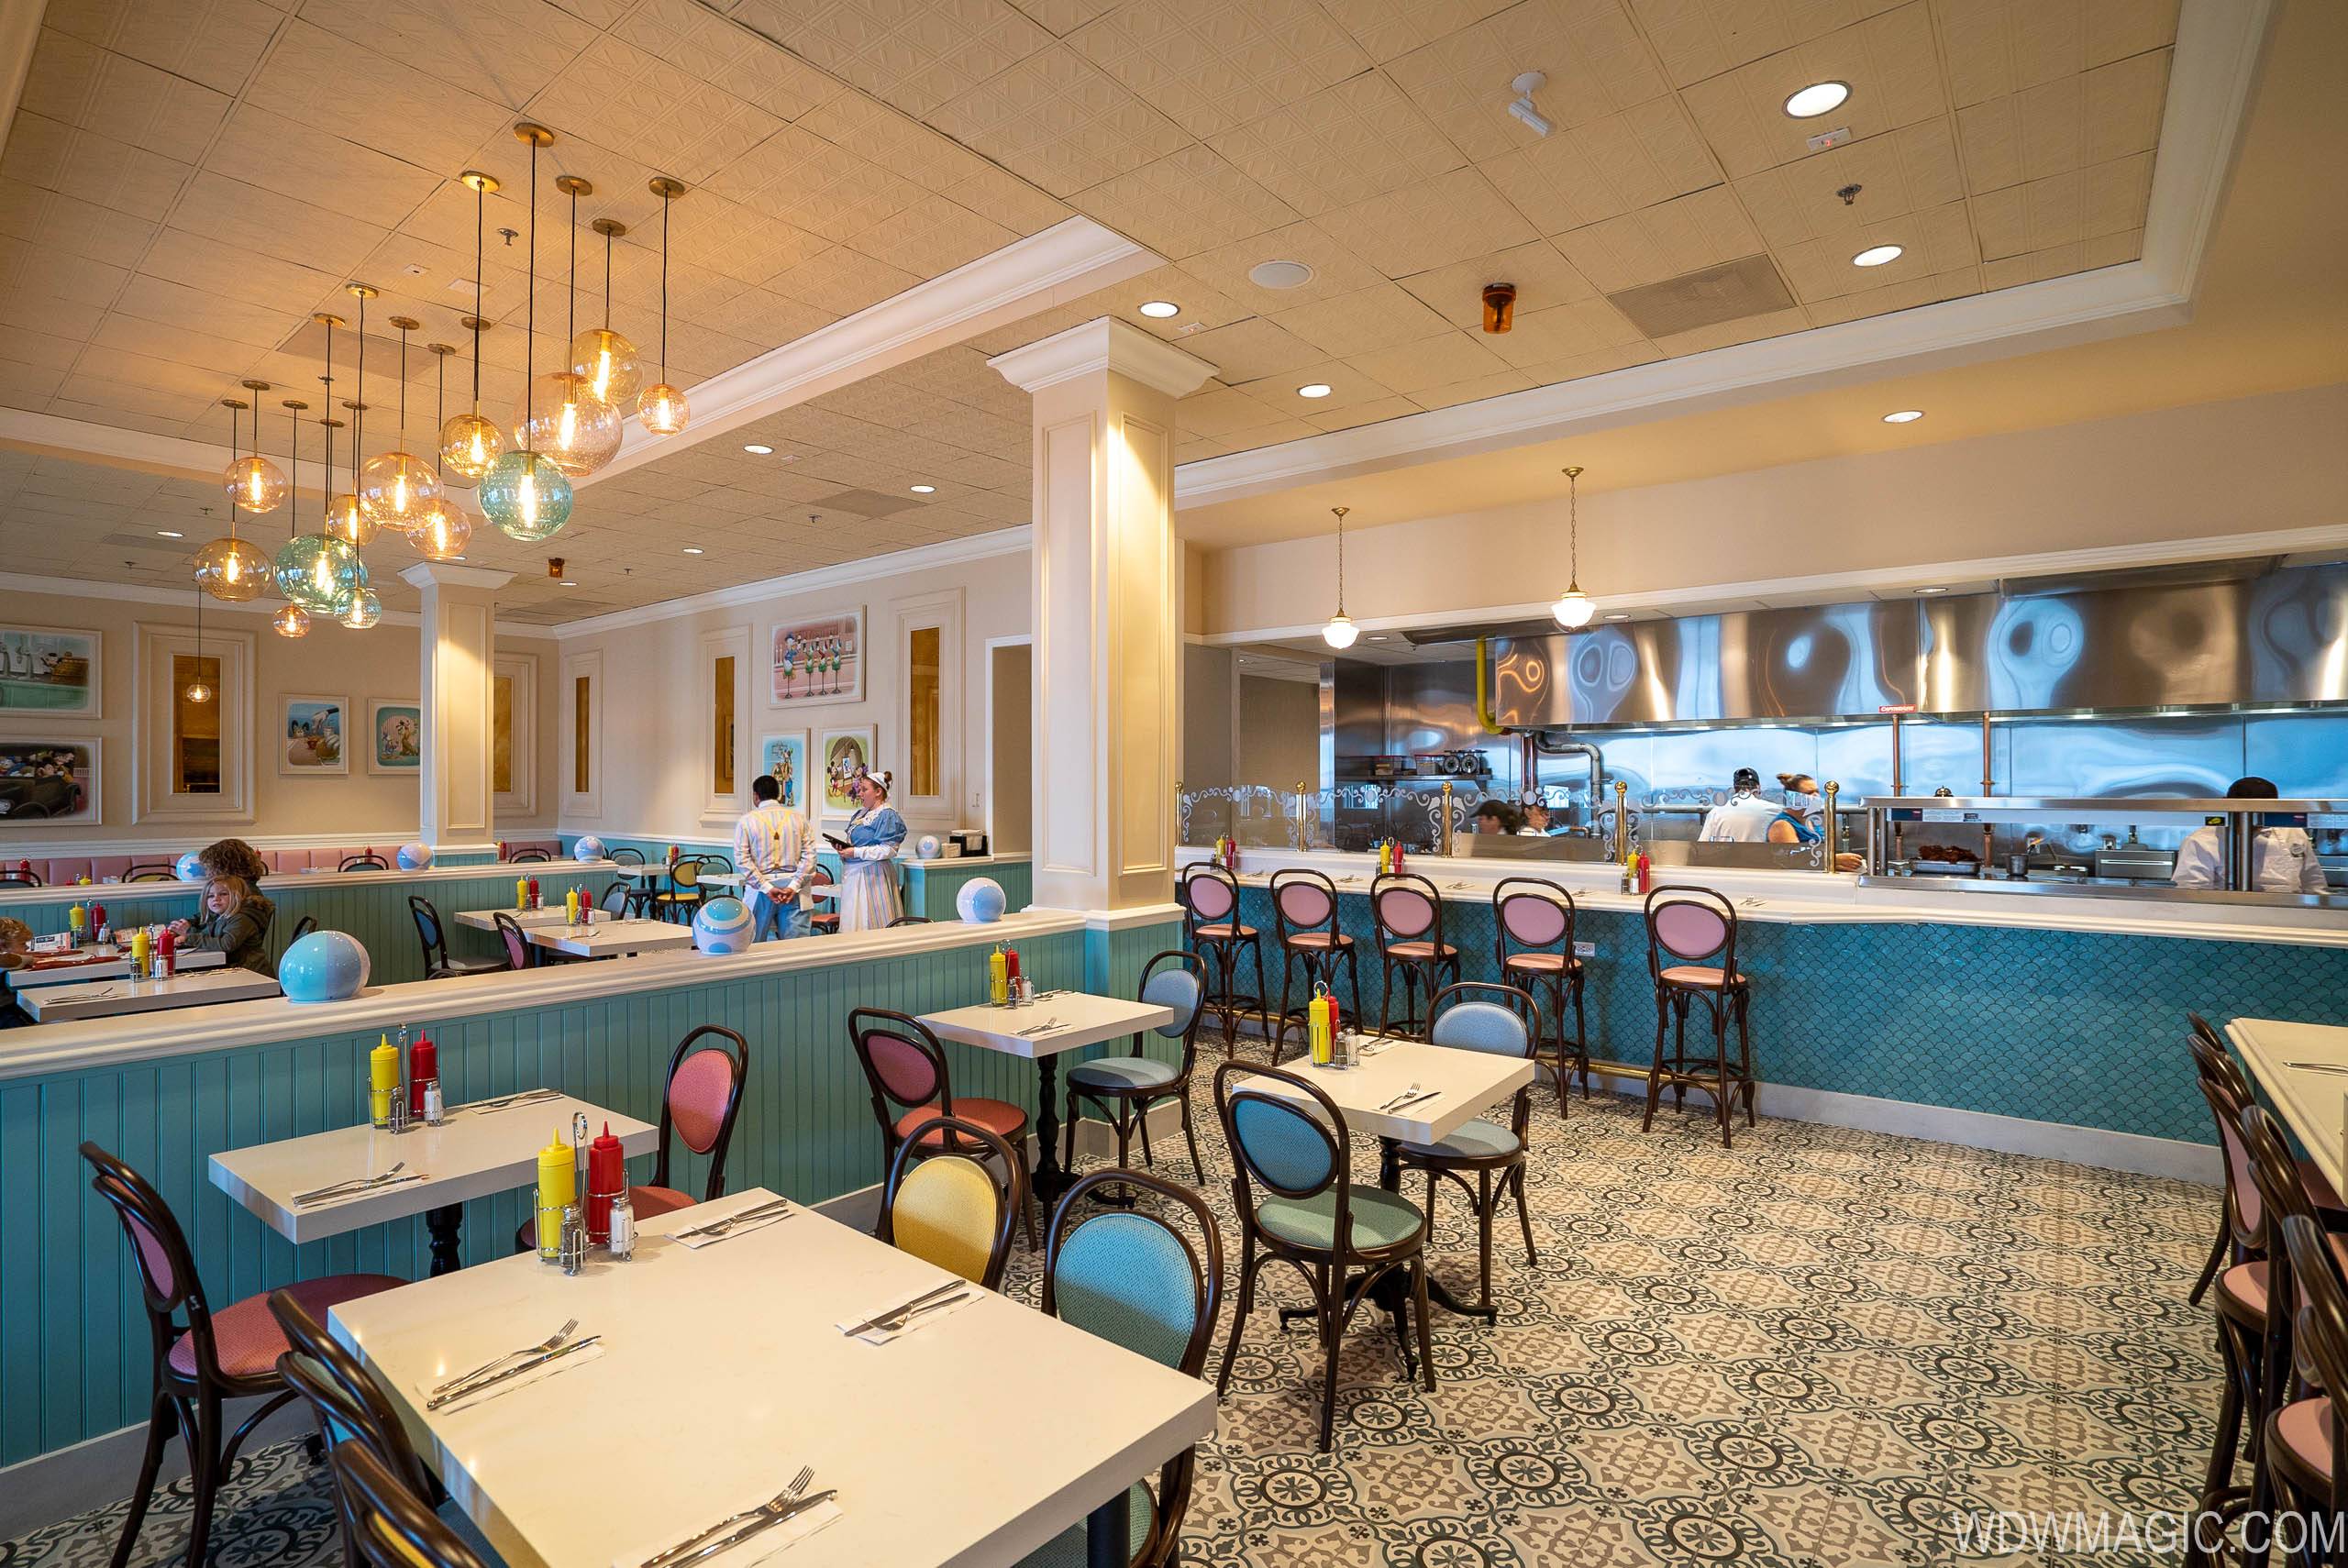 PHOTOS - Newly expanded Beaches and Cream reopens at Disney's Beach Club Resort